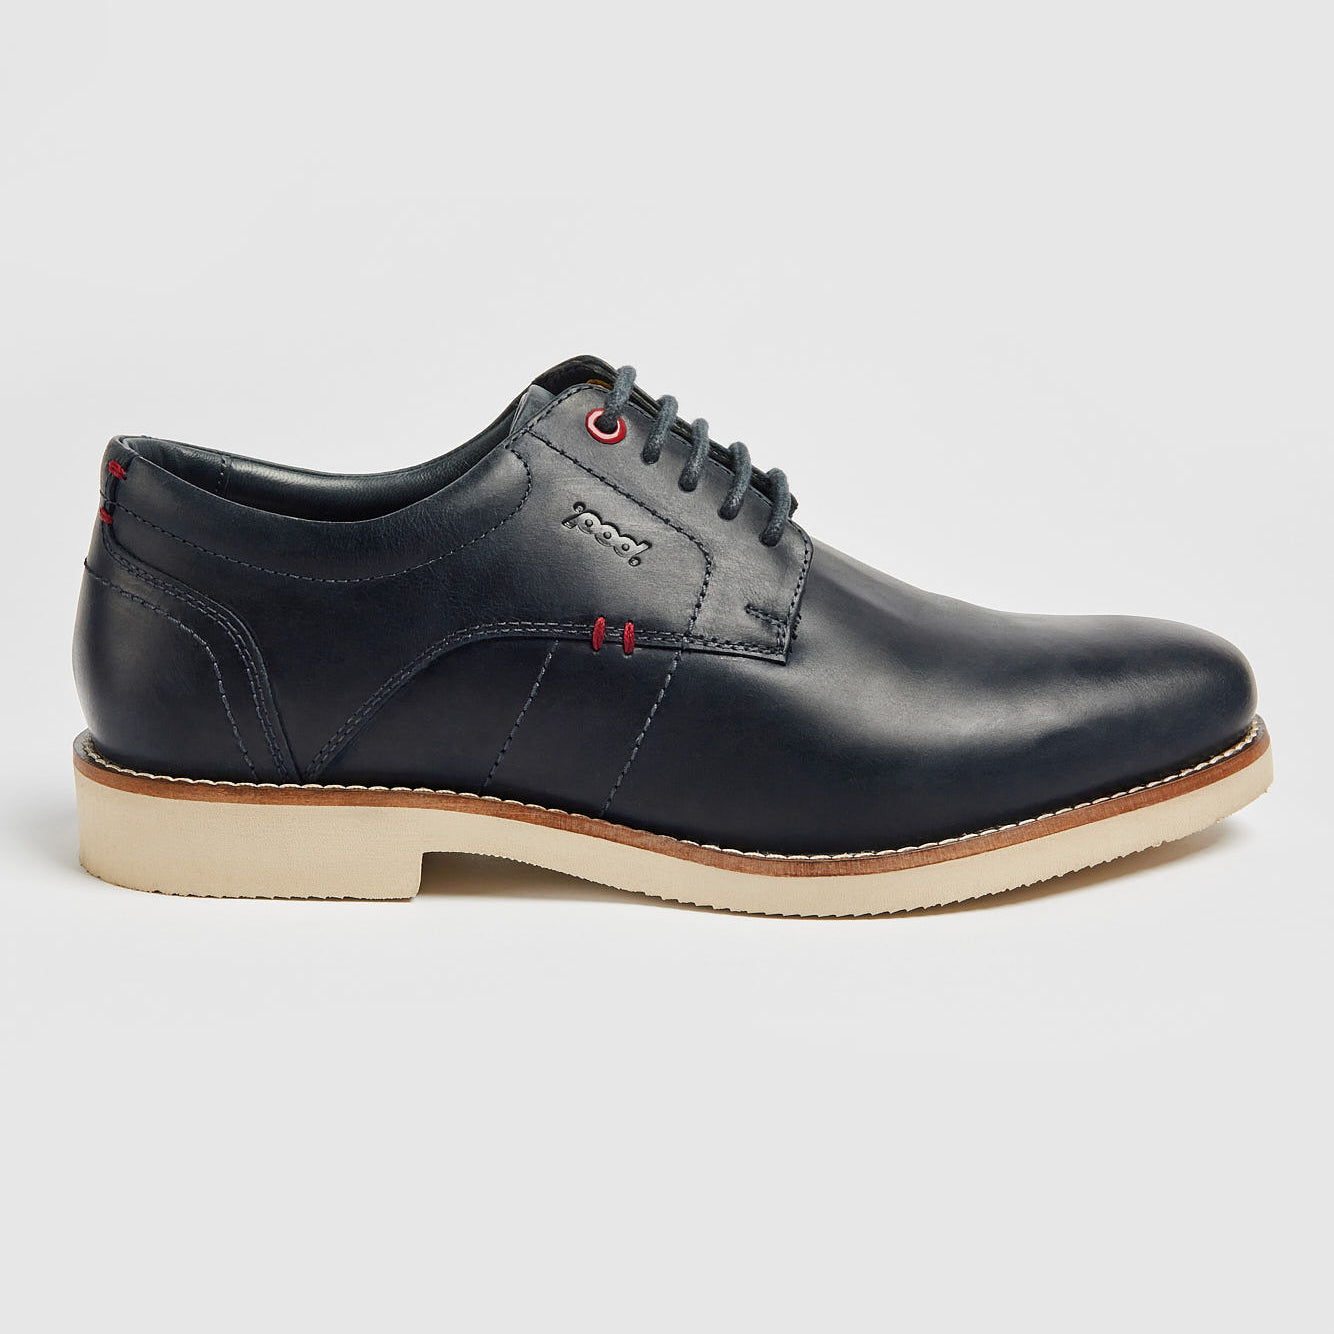 HAMPTON LEATHER SMART CASUAL LACE UP SHOES